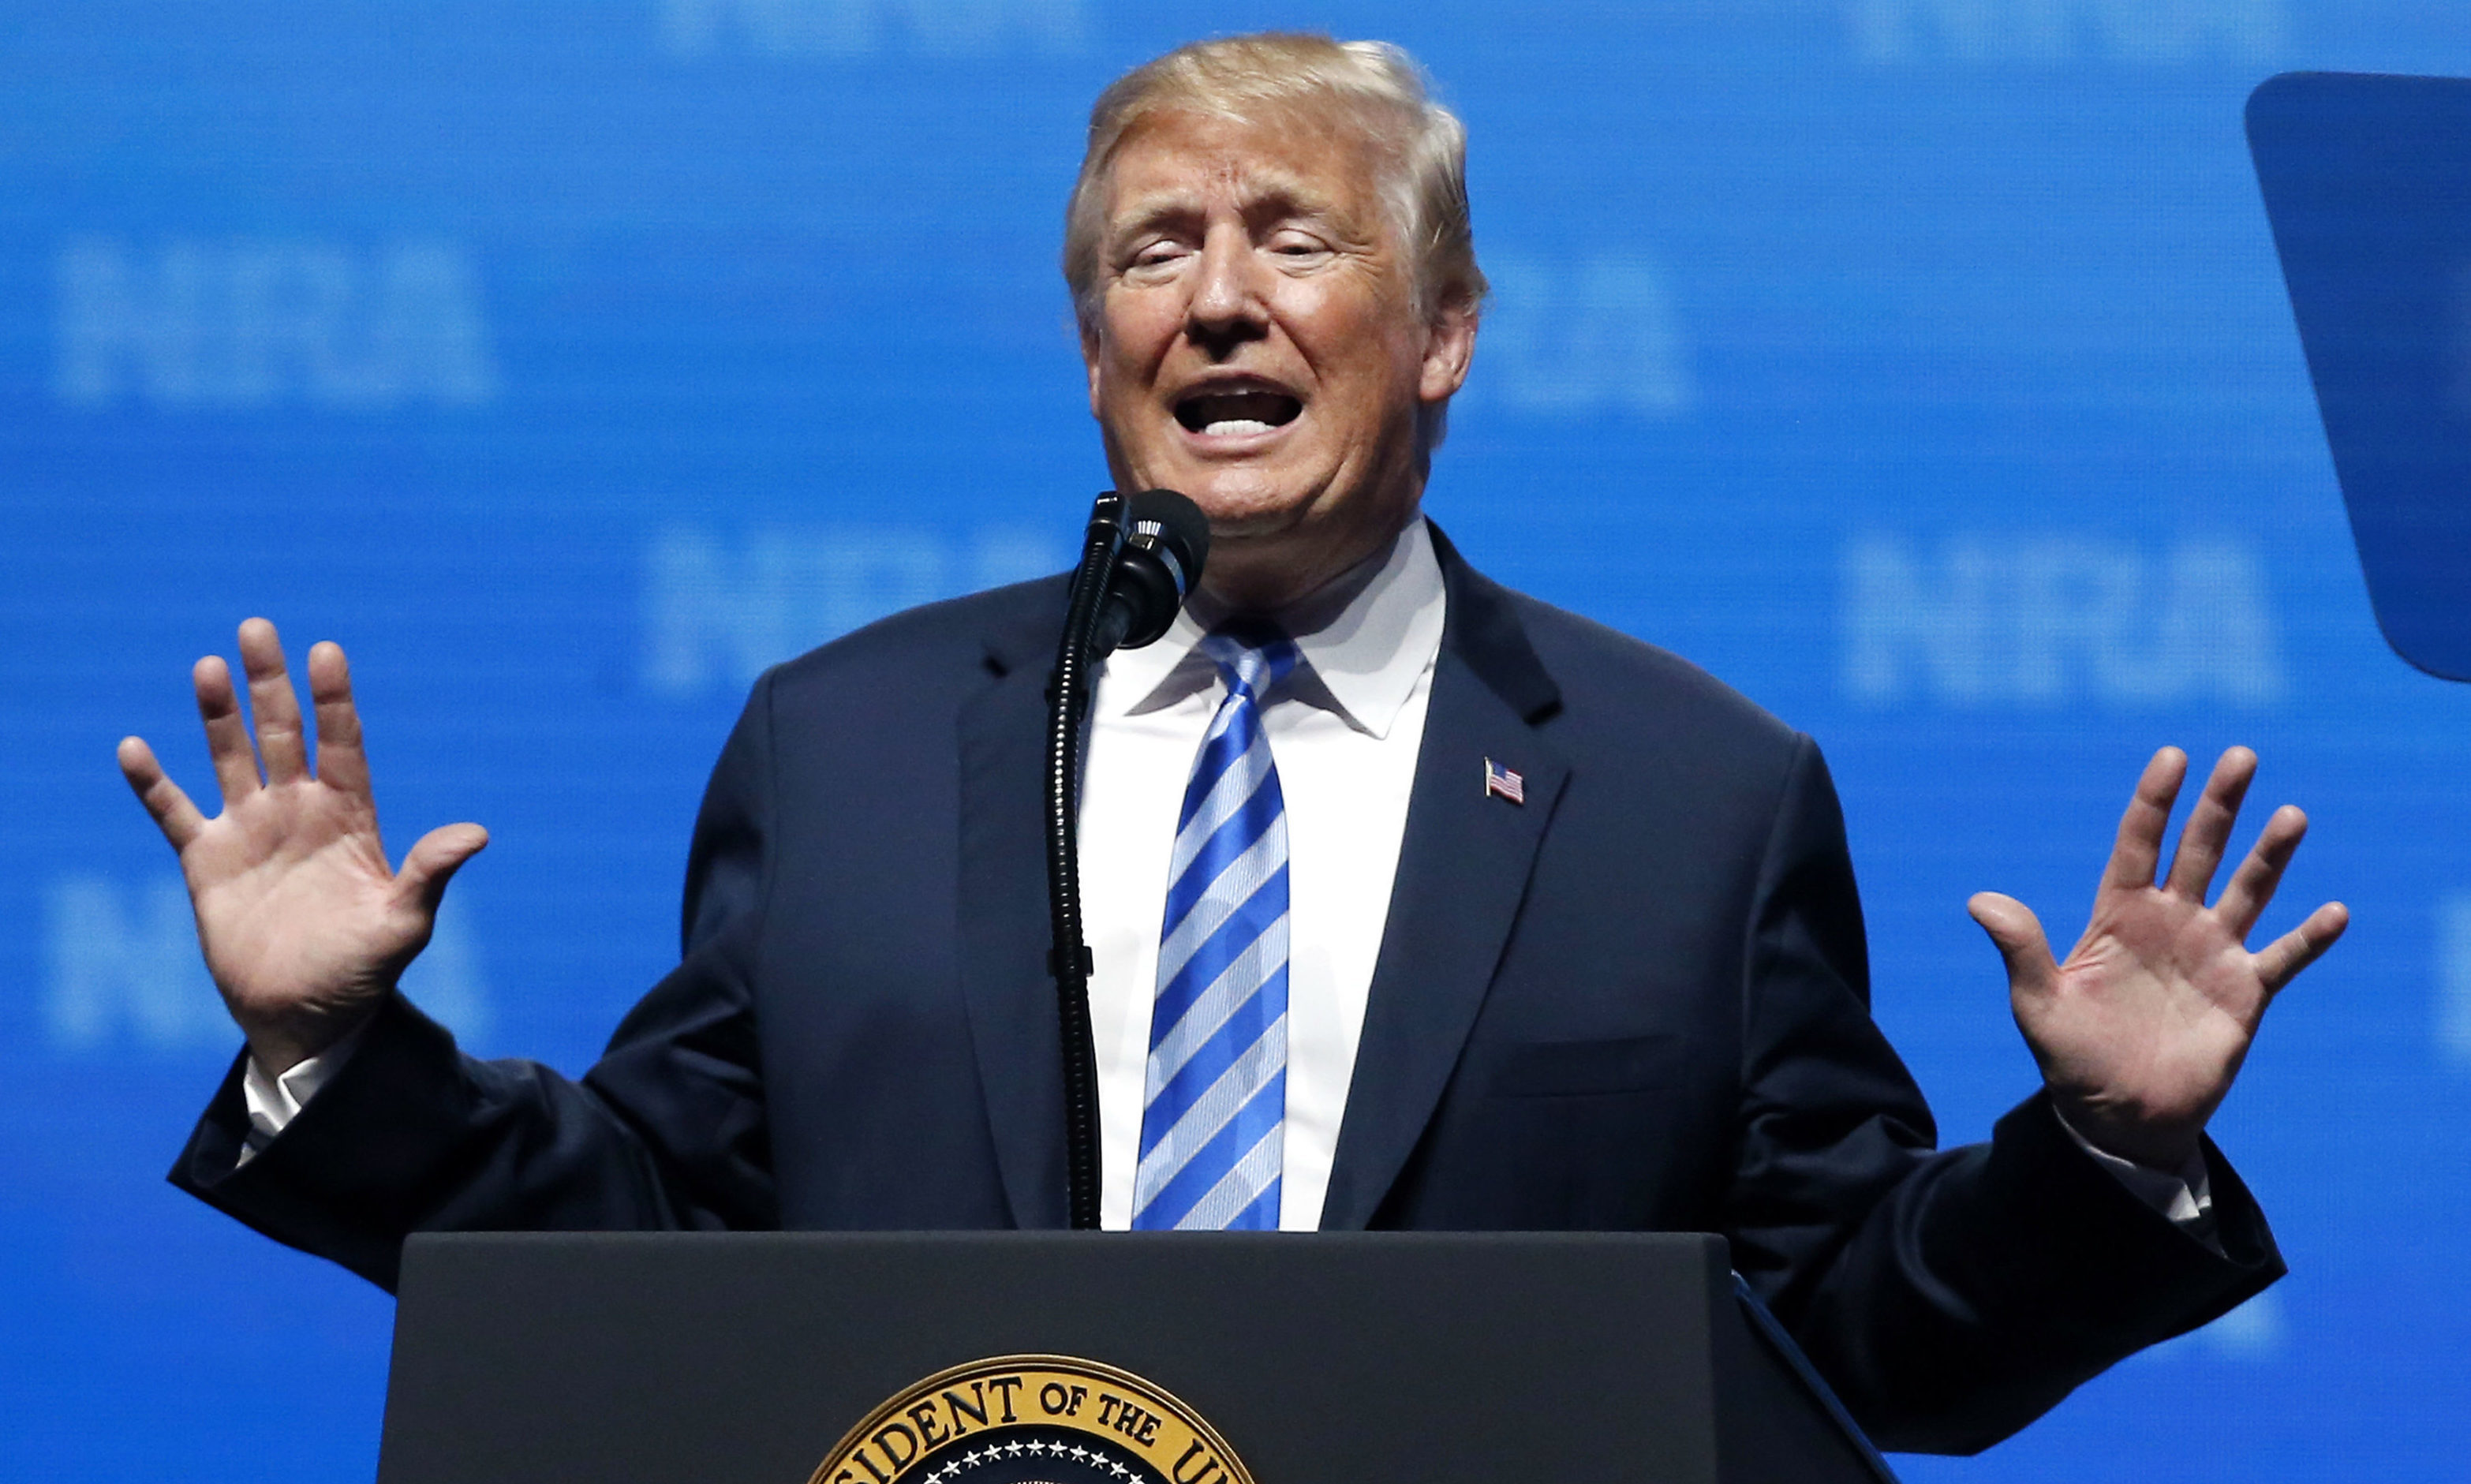 President Donald Trump speaks at the National Rifle Association annual convention in Dallas.